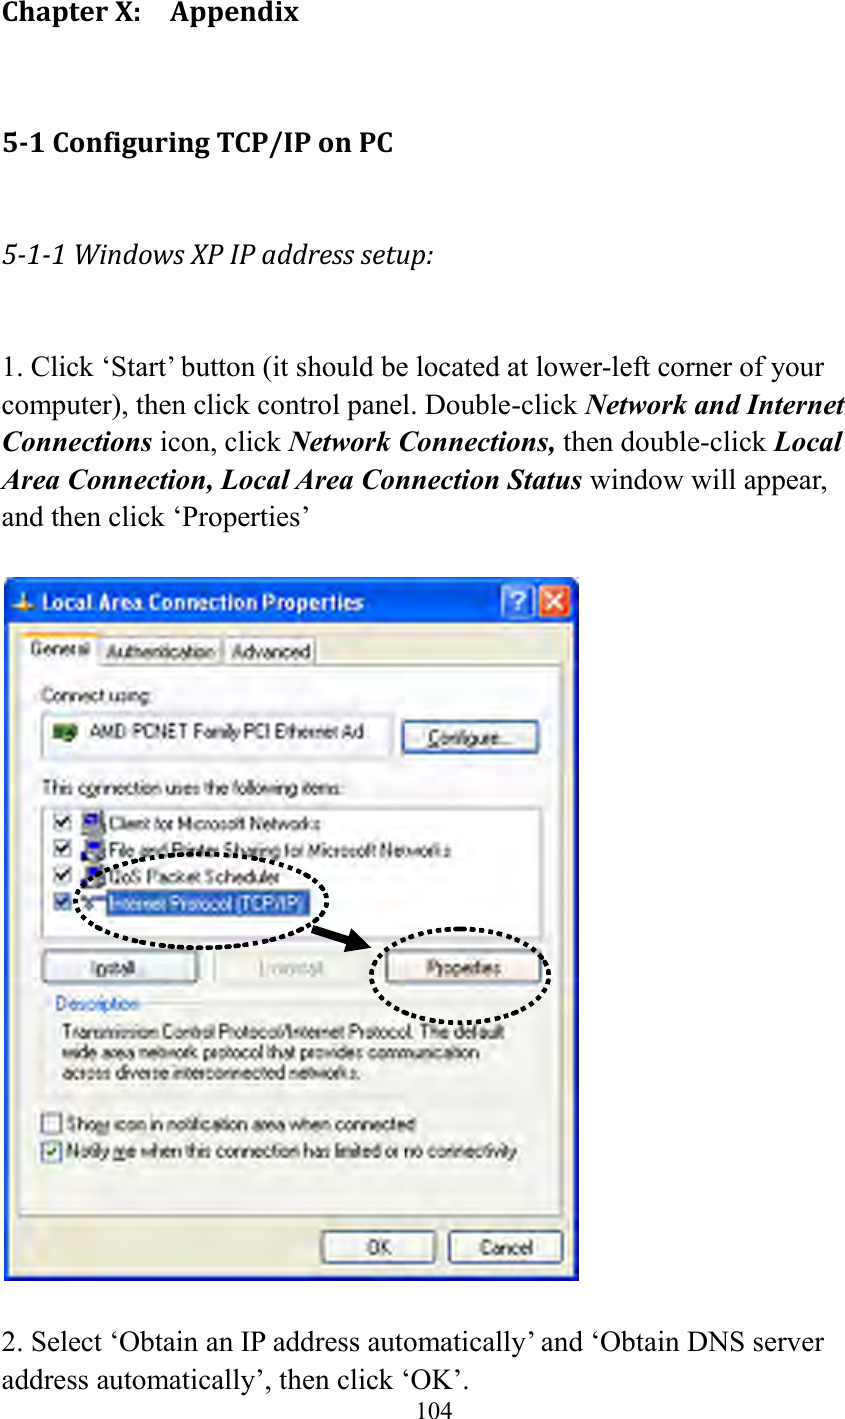  104  Chapter X:    Appendix 5-1 Configuring TCP/IP on PC 5-1-1 Windows XP IP address setup:  1. Click ‘Start’ button (it should be located at lower-left corner of your computer), then click control panel. Double-click Network and Internet Connections icon, click Network Connections, then double-click Local Area Connection, Local Area Connection Status window will appear, and then click ‘Properties’    2. Select ‘Obtain an IP address automatically’ and ‘Obtain DNS server address automatically’, then click ‘OK’. 